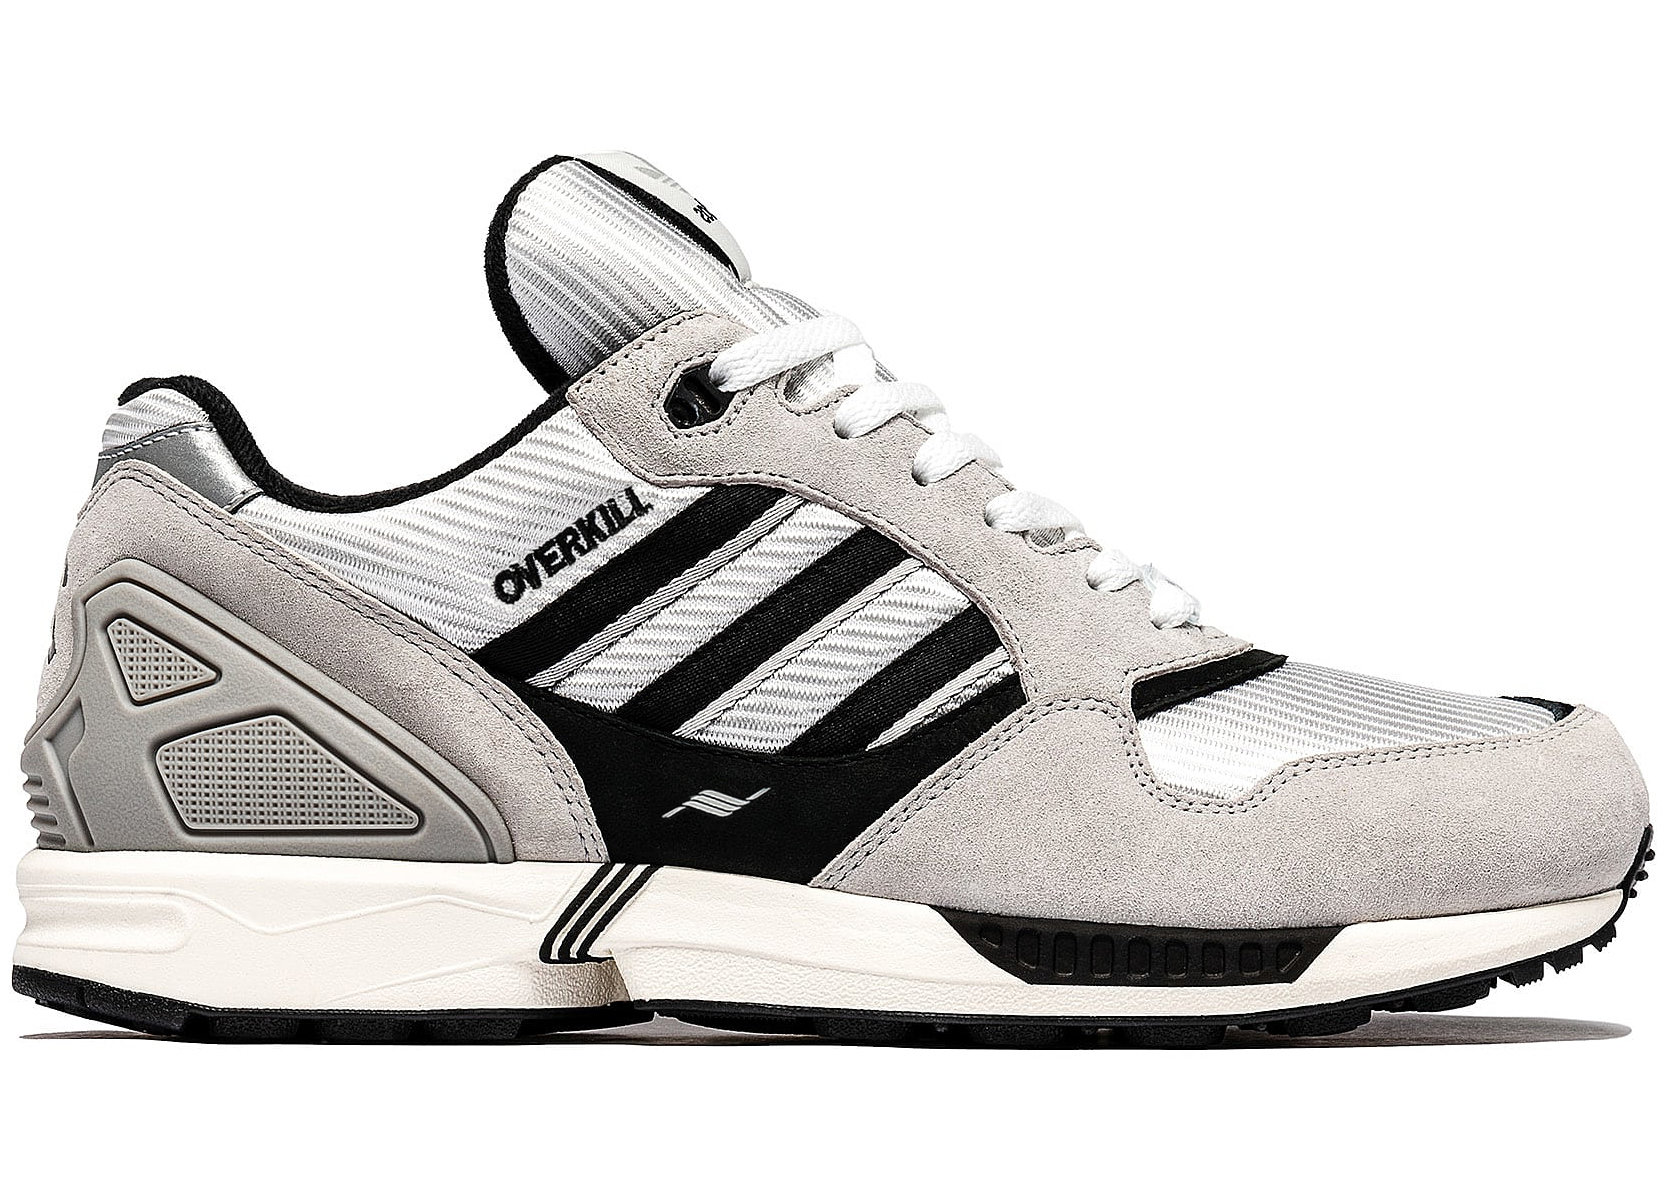 adidas ZX 6000 Overkill Friends and Family Men's - ID3549 - US